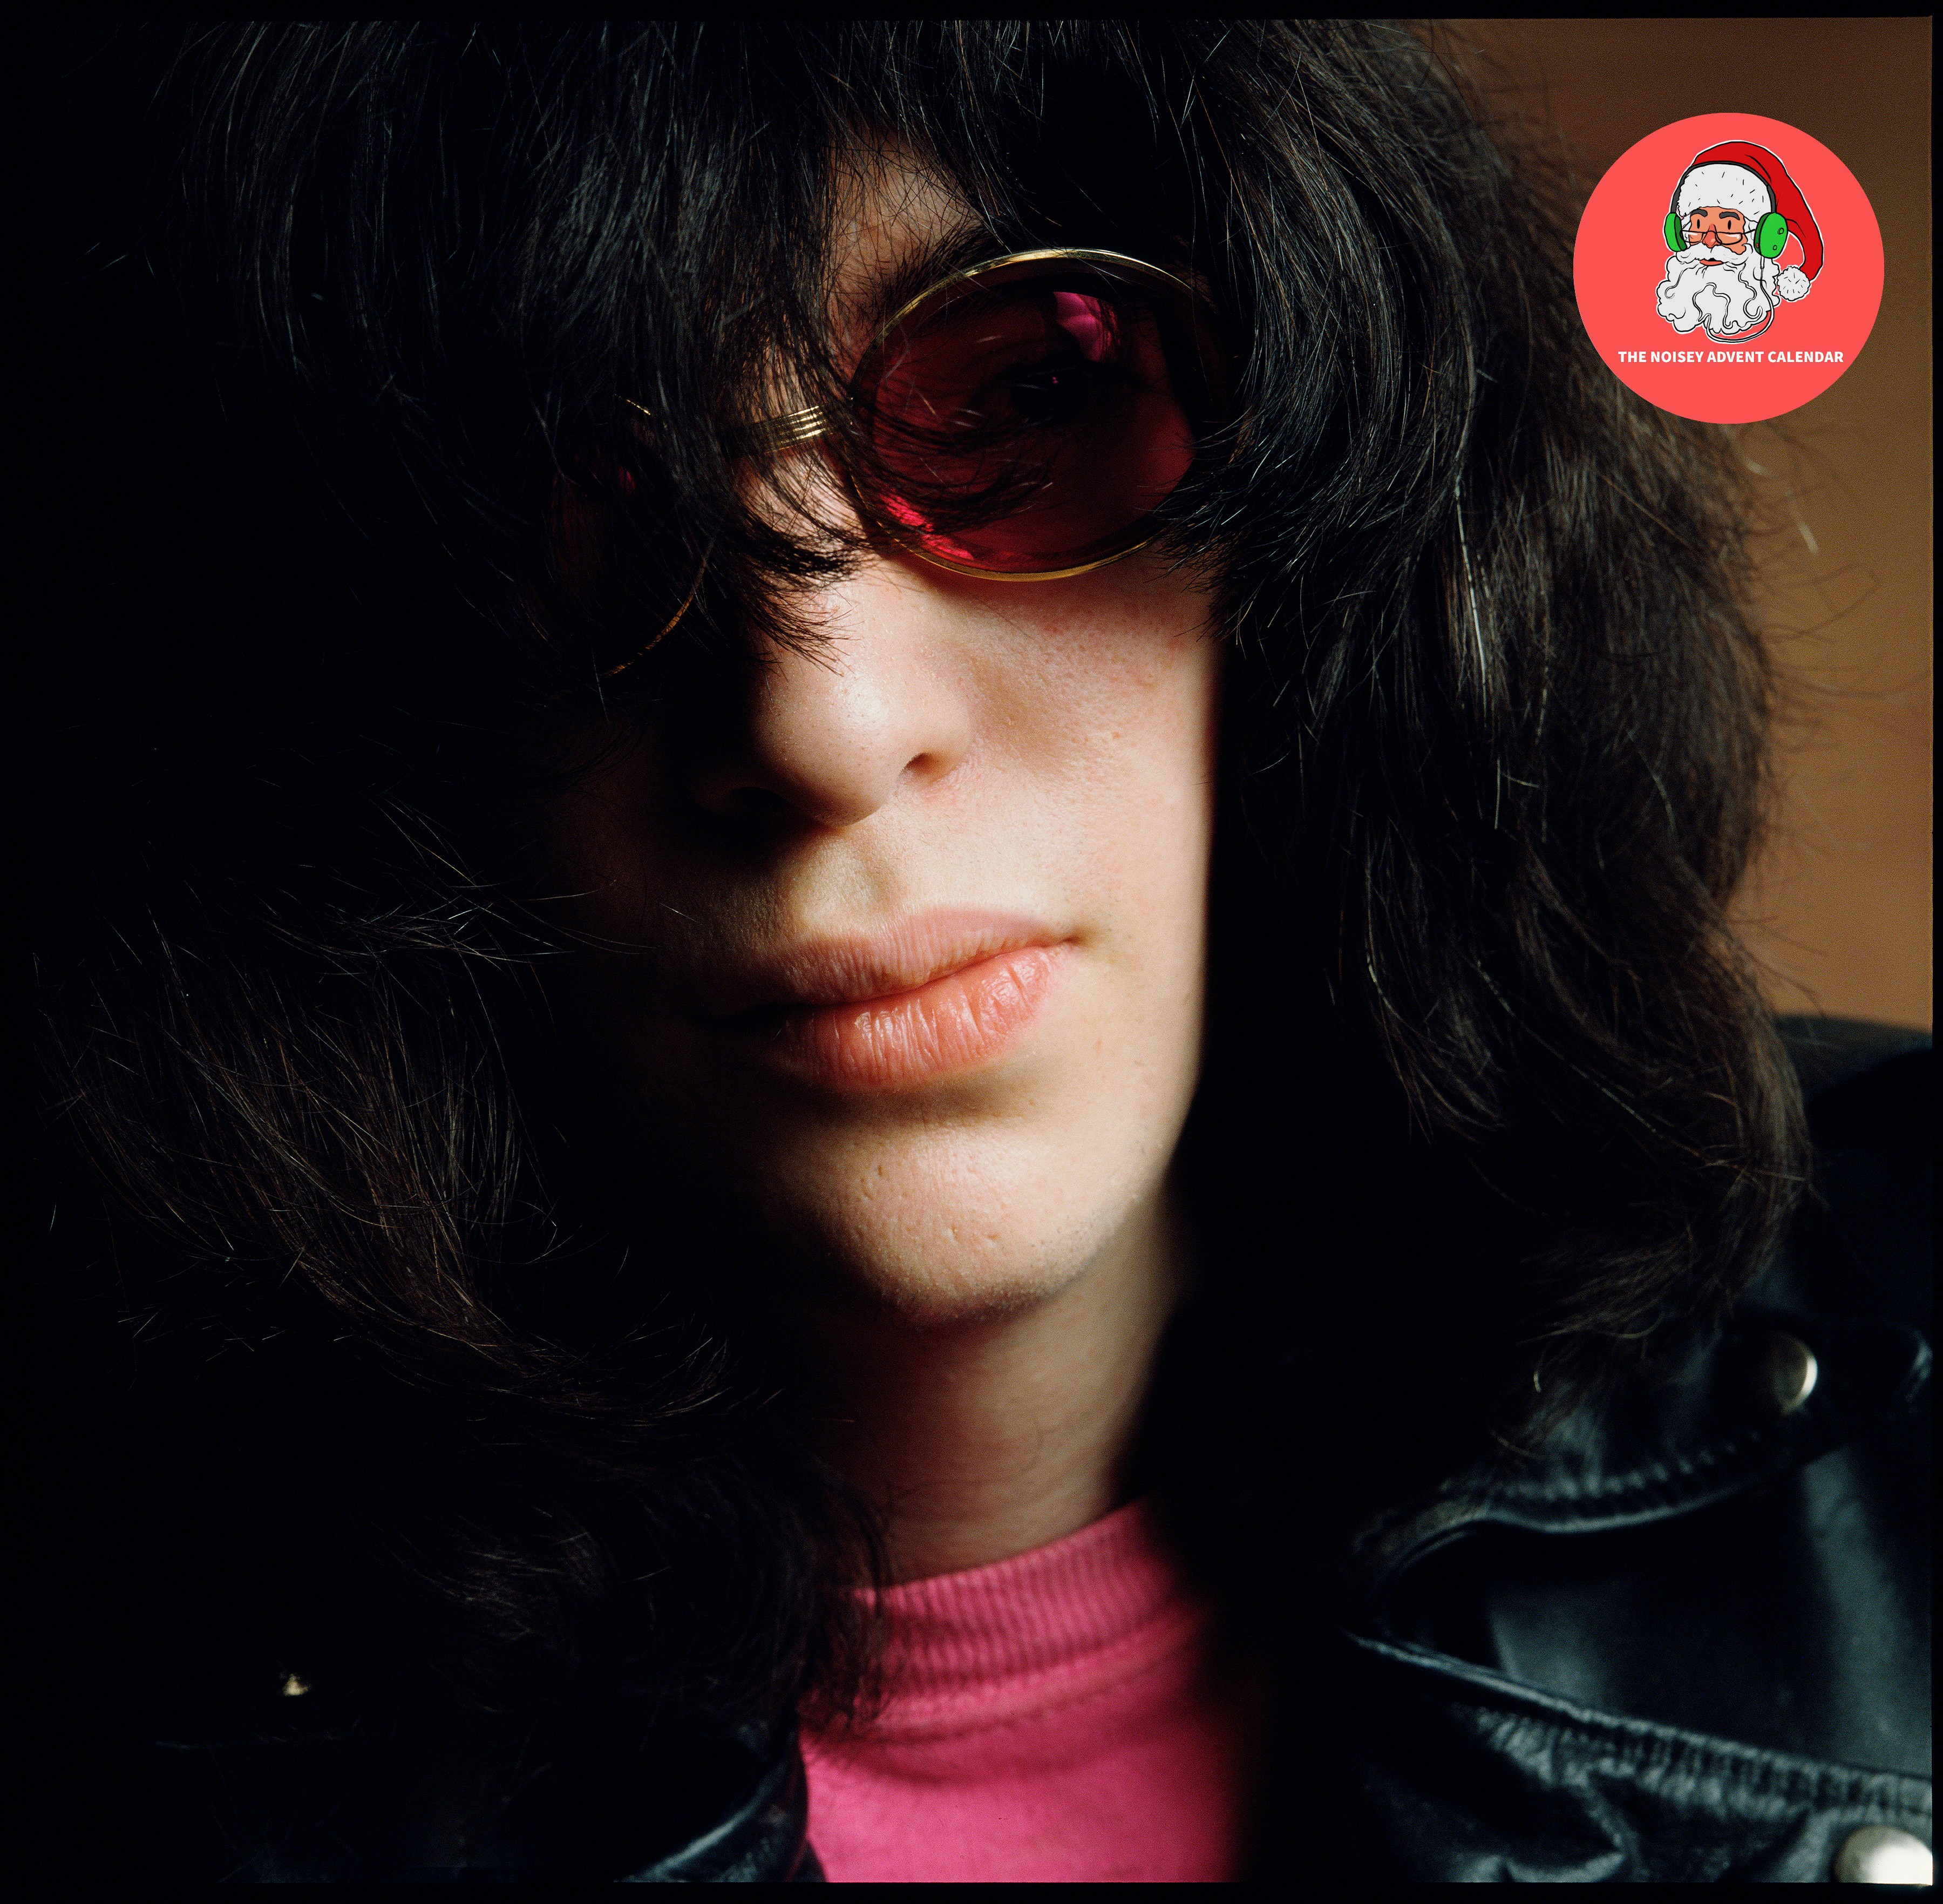 For the Love of Joey Ramone, Put the Fighting Aside This Christmas